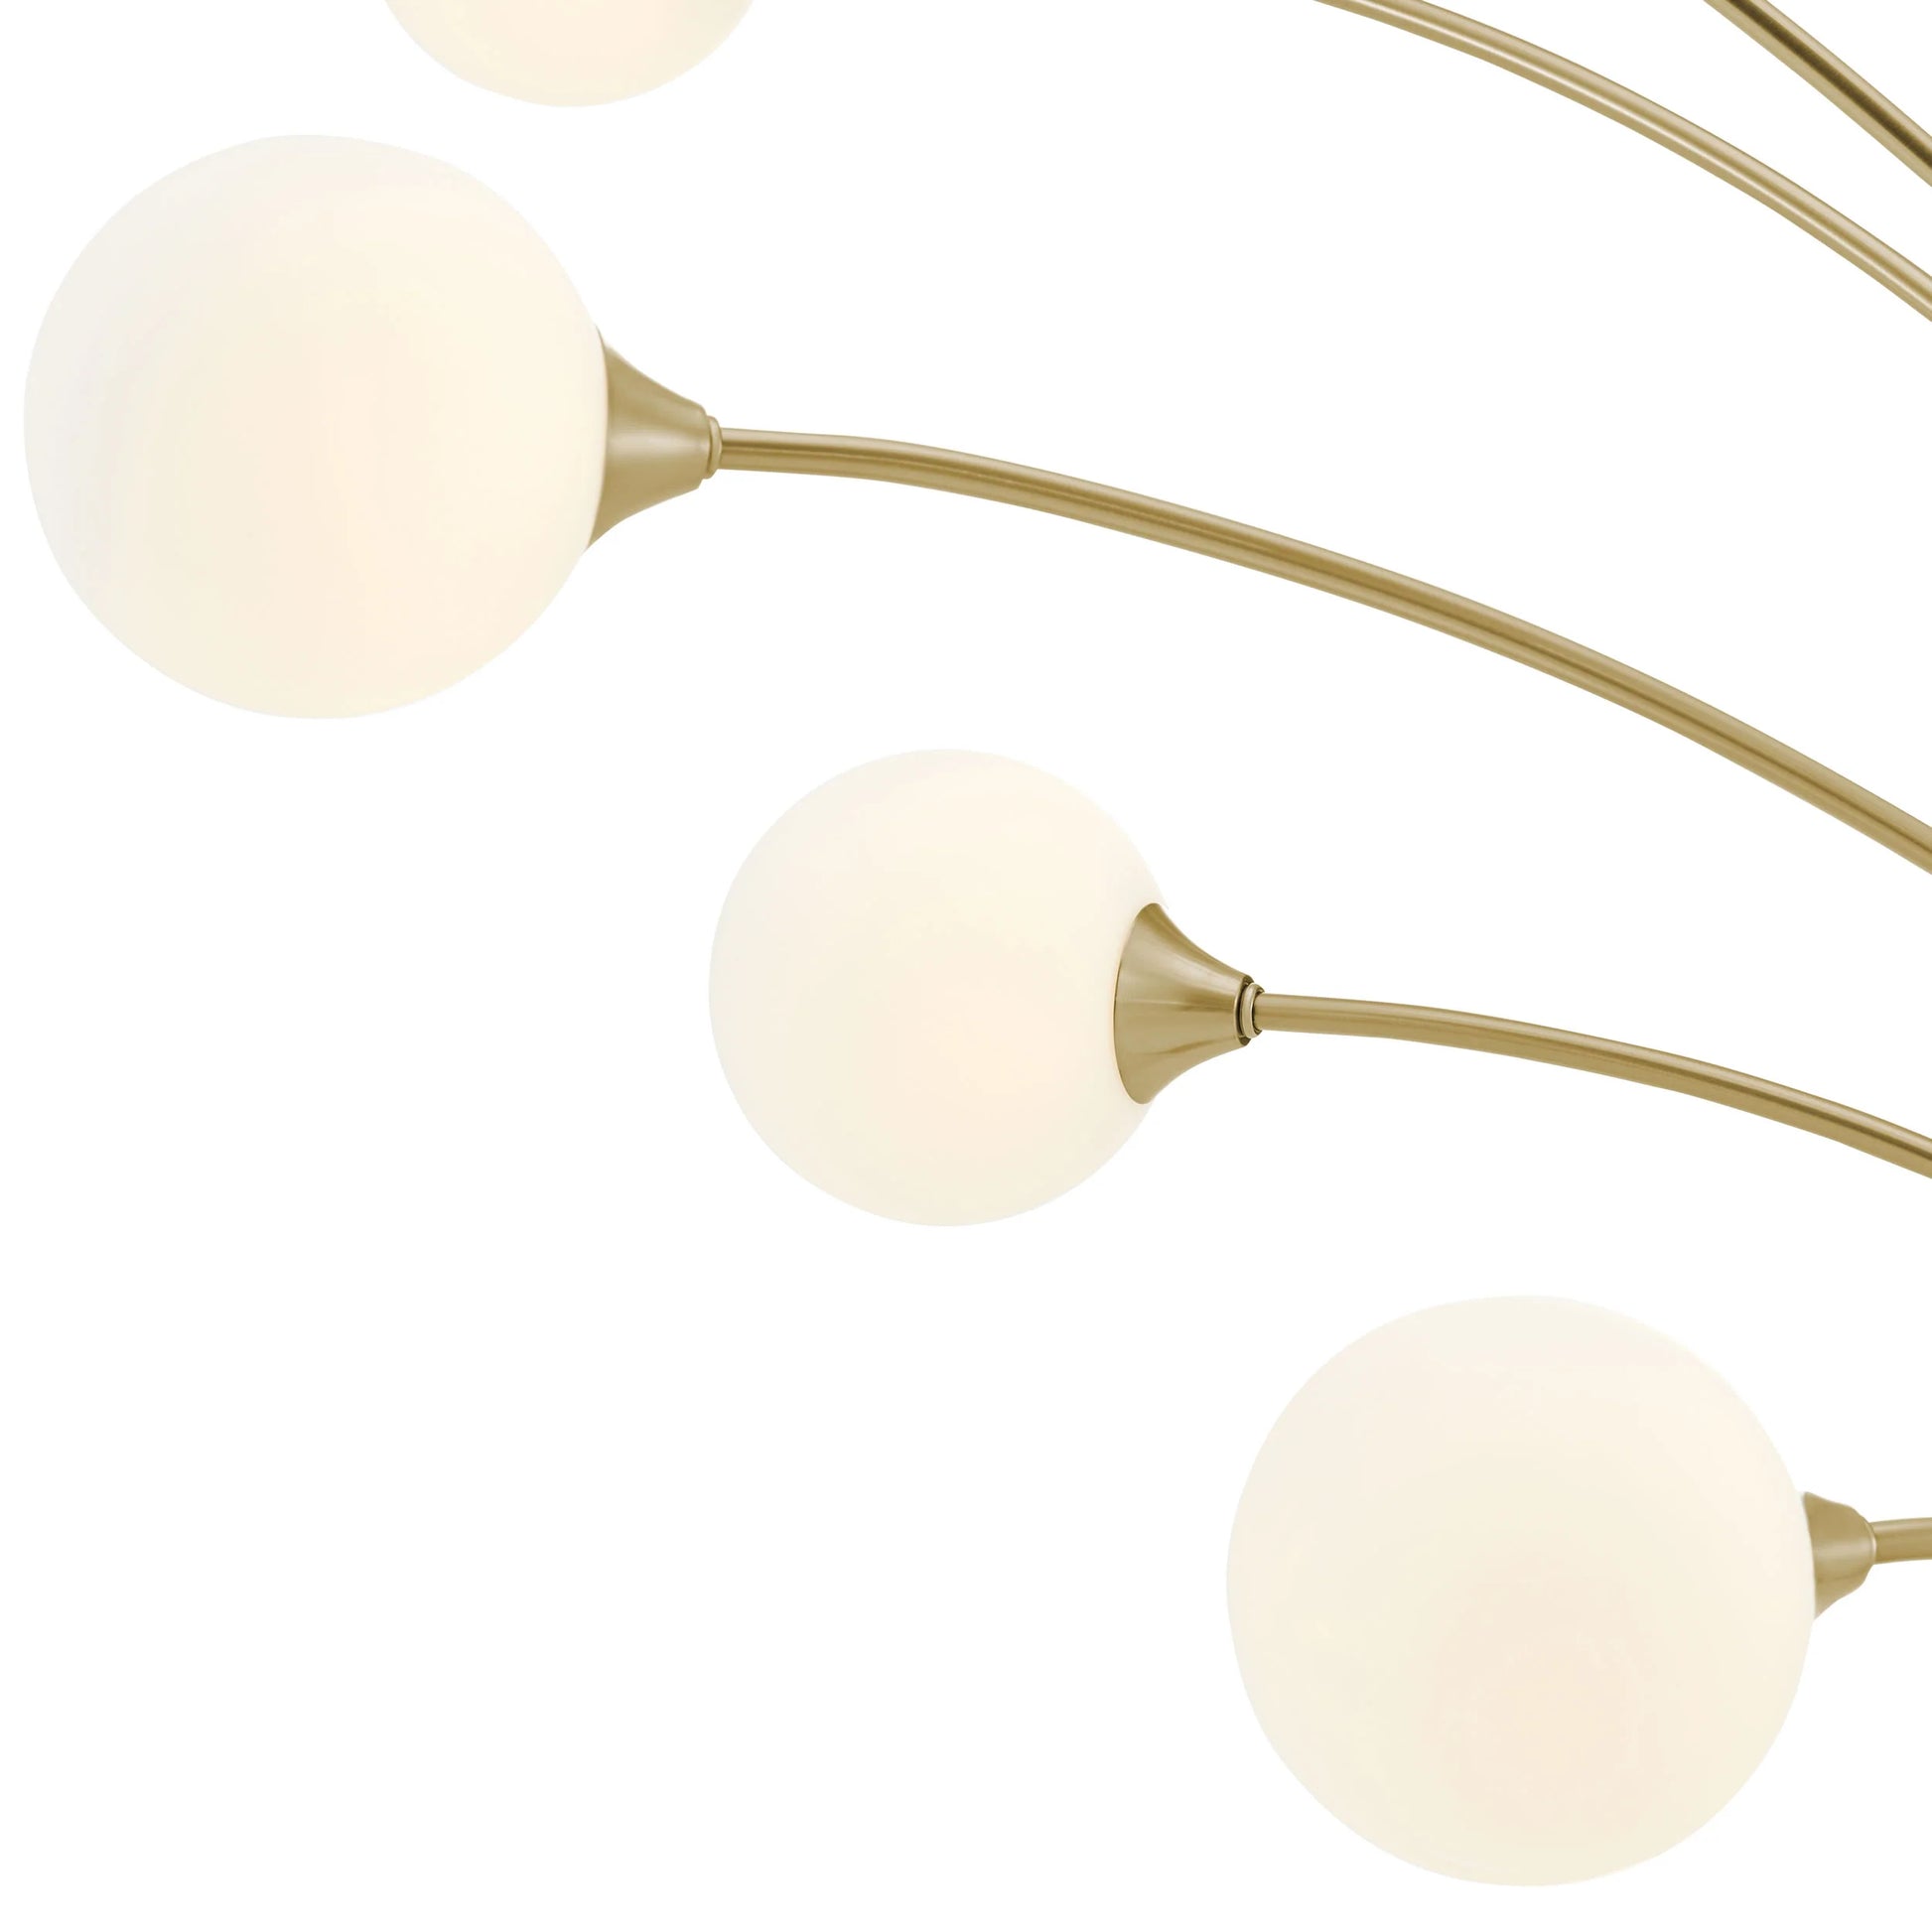 Finesse Decor Anechdoche 5-Light Gold and White Floor Lamp 3